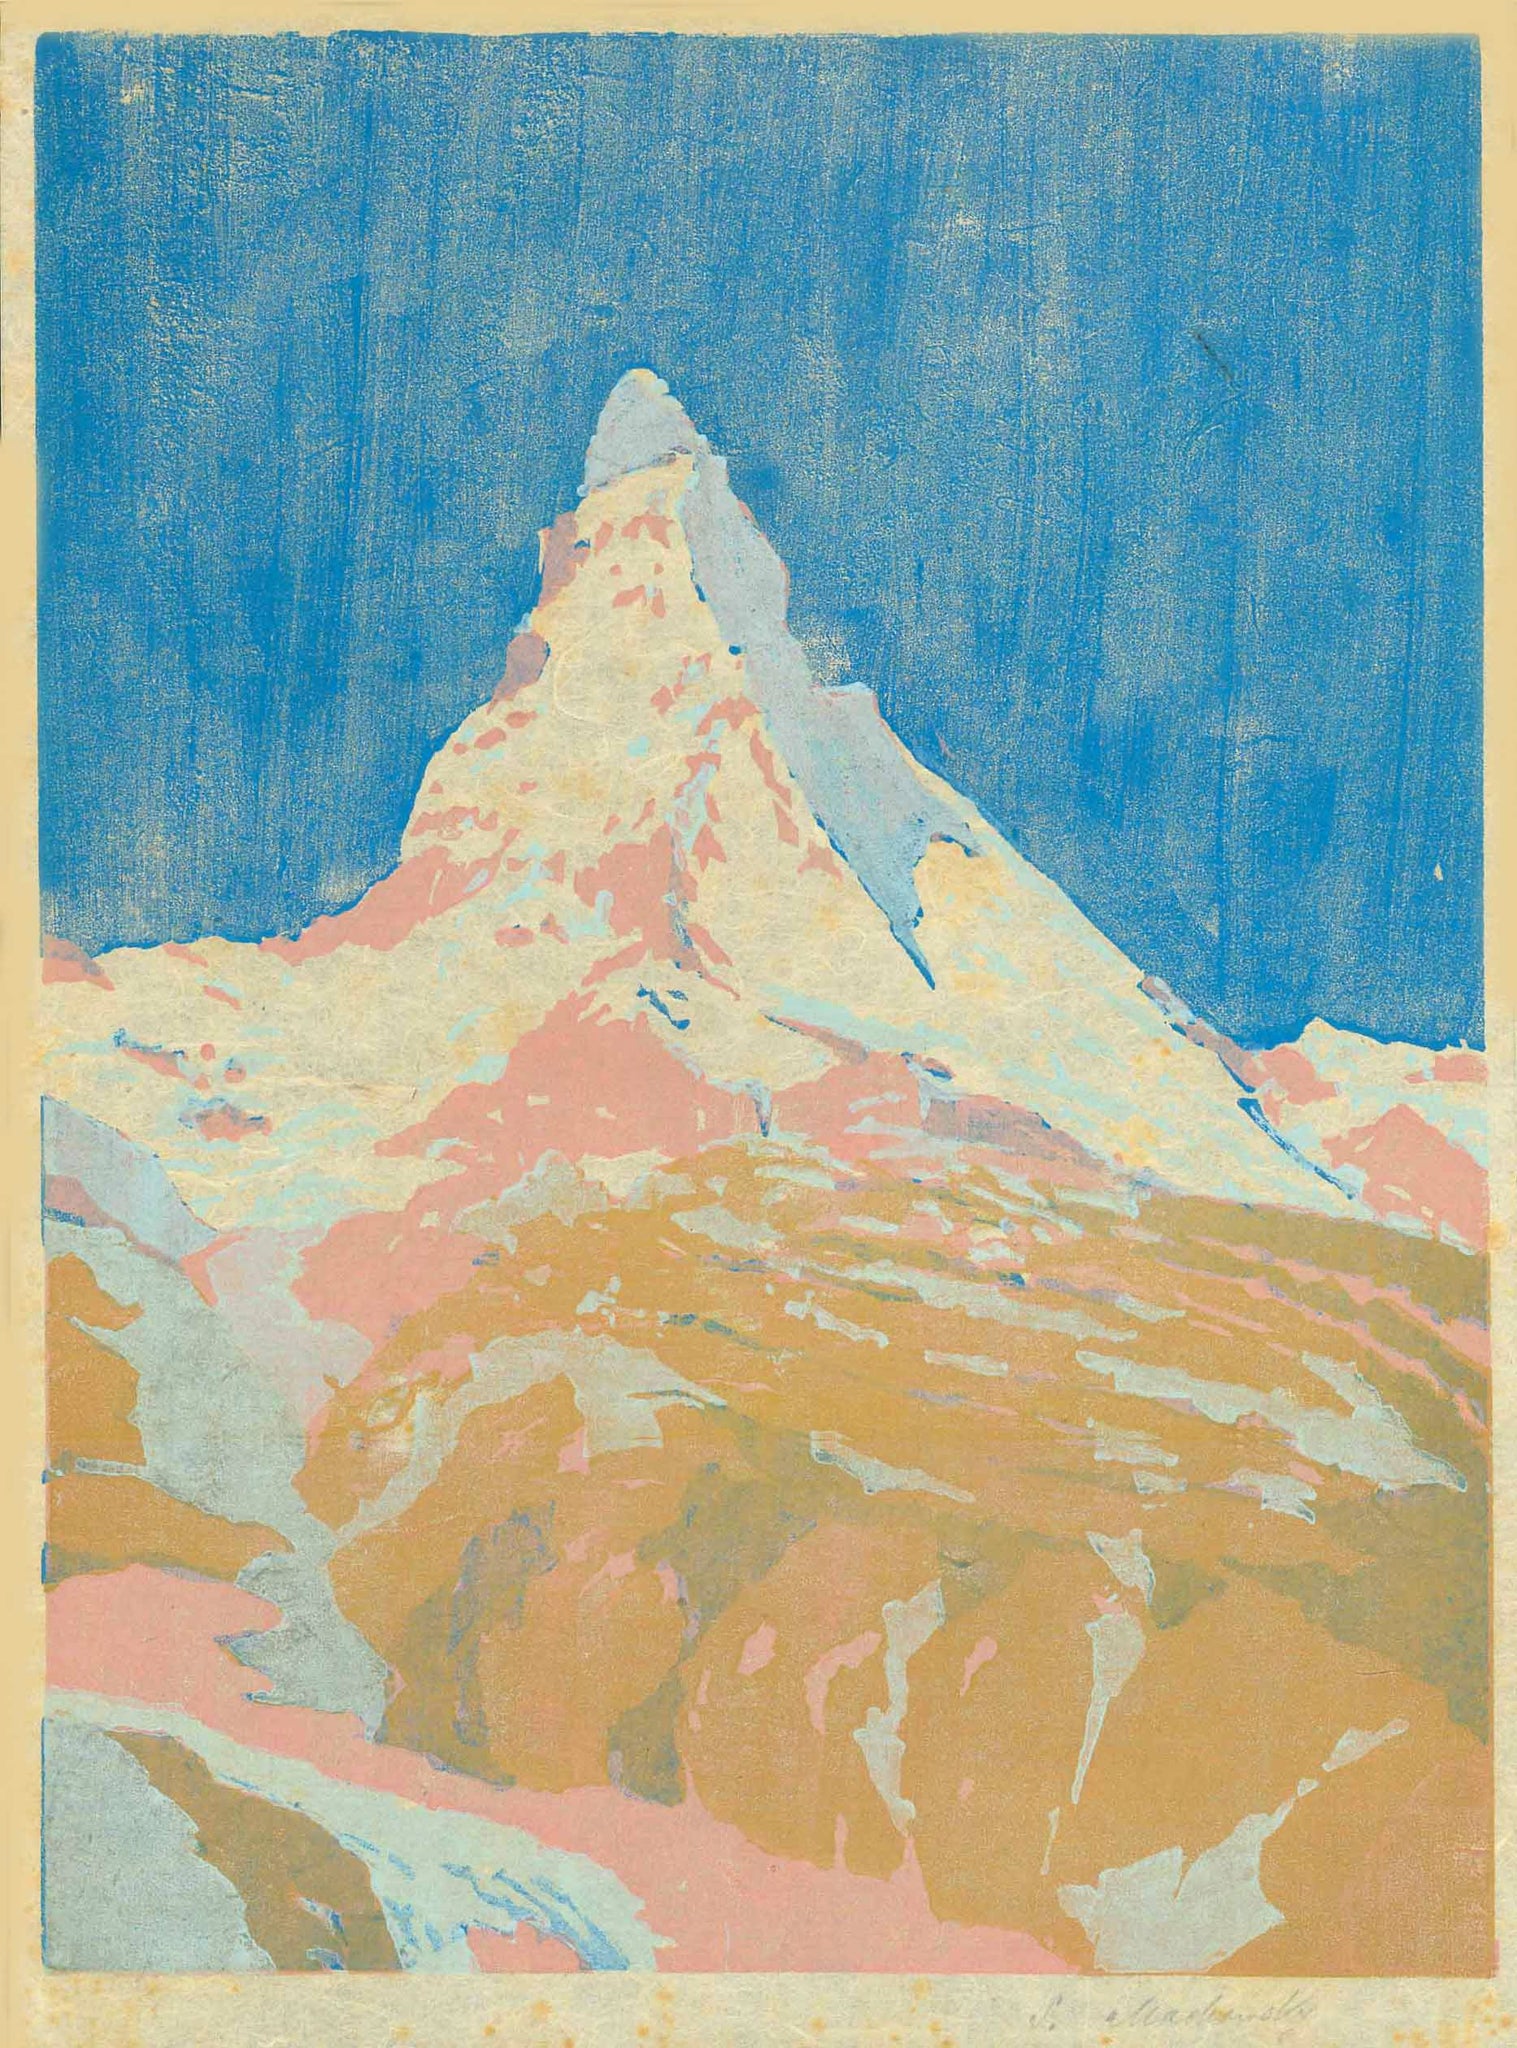 Matterhorn  Original woodcut in extraordinary coloring, signed lightly in margin (lower right) S. Mackowsky.  Siegfried Mackowsky born in Dresden November 25, 1878, died in Dresden February 17, 1941. He was student of the Dresden Art Academy under R. Müller, E. Bantzer, E. Bracht and G. Kuehl. He was co-founder of artist group "1913". His paintings and woodcuts, mostly landscapes, mountains, and town views are known for their fine moody expression and exquisite color.  Original antique print 